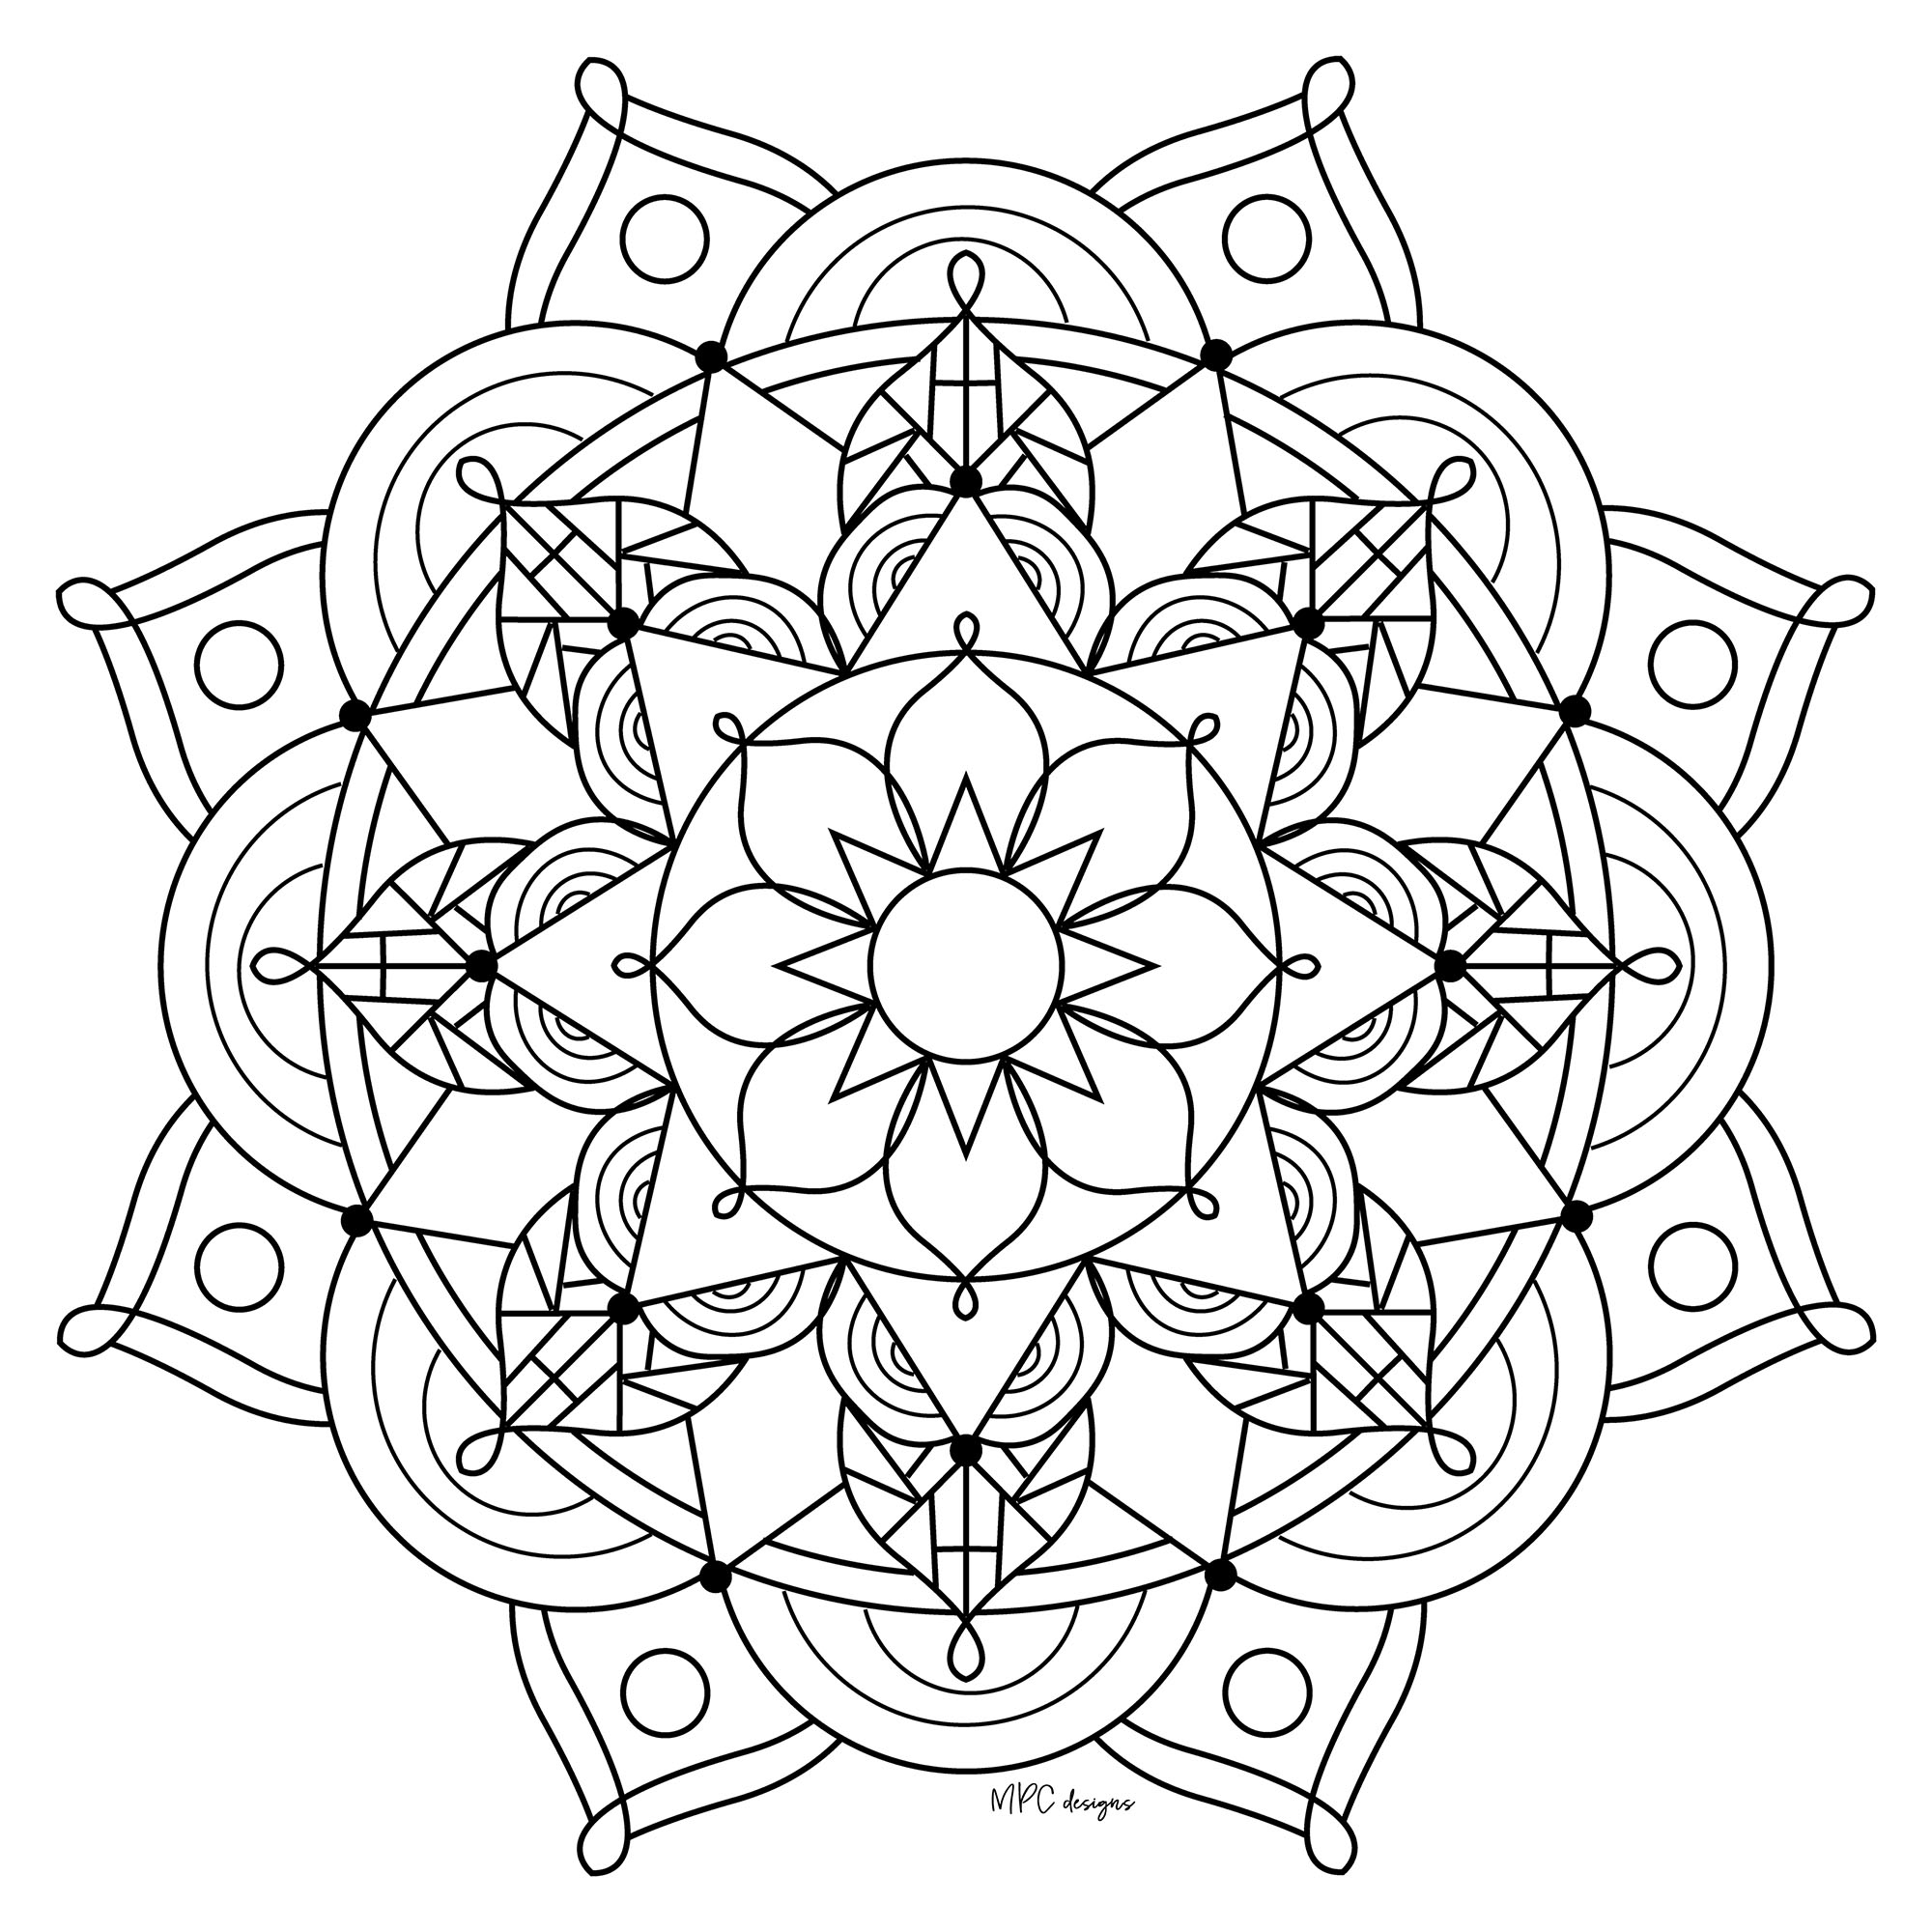 Download Mandala mpc design 10 - MPC Design - Coloring Pages for Adults